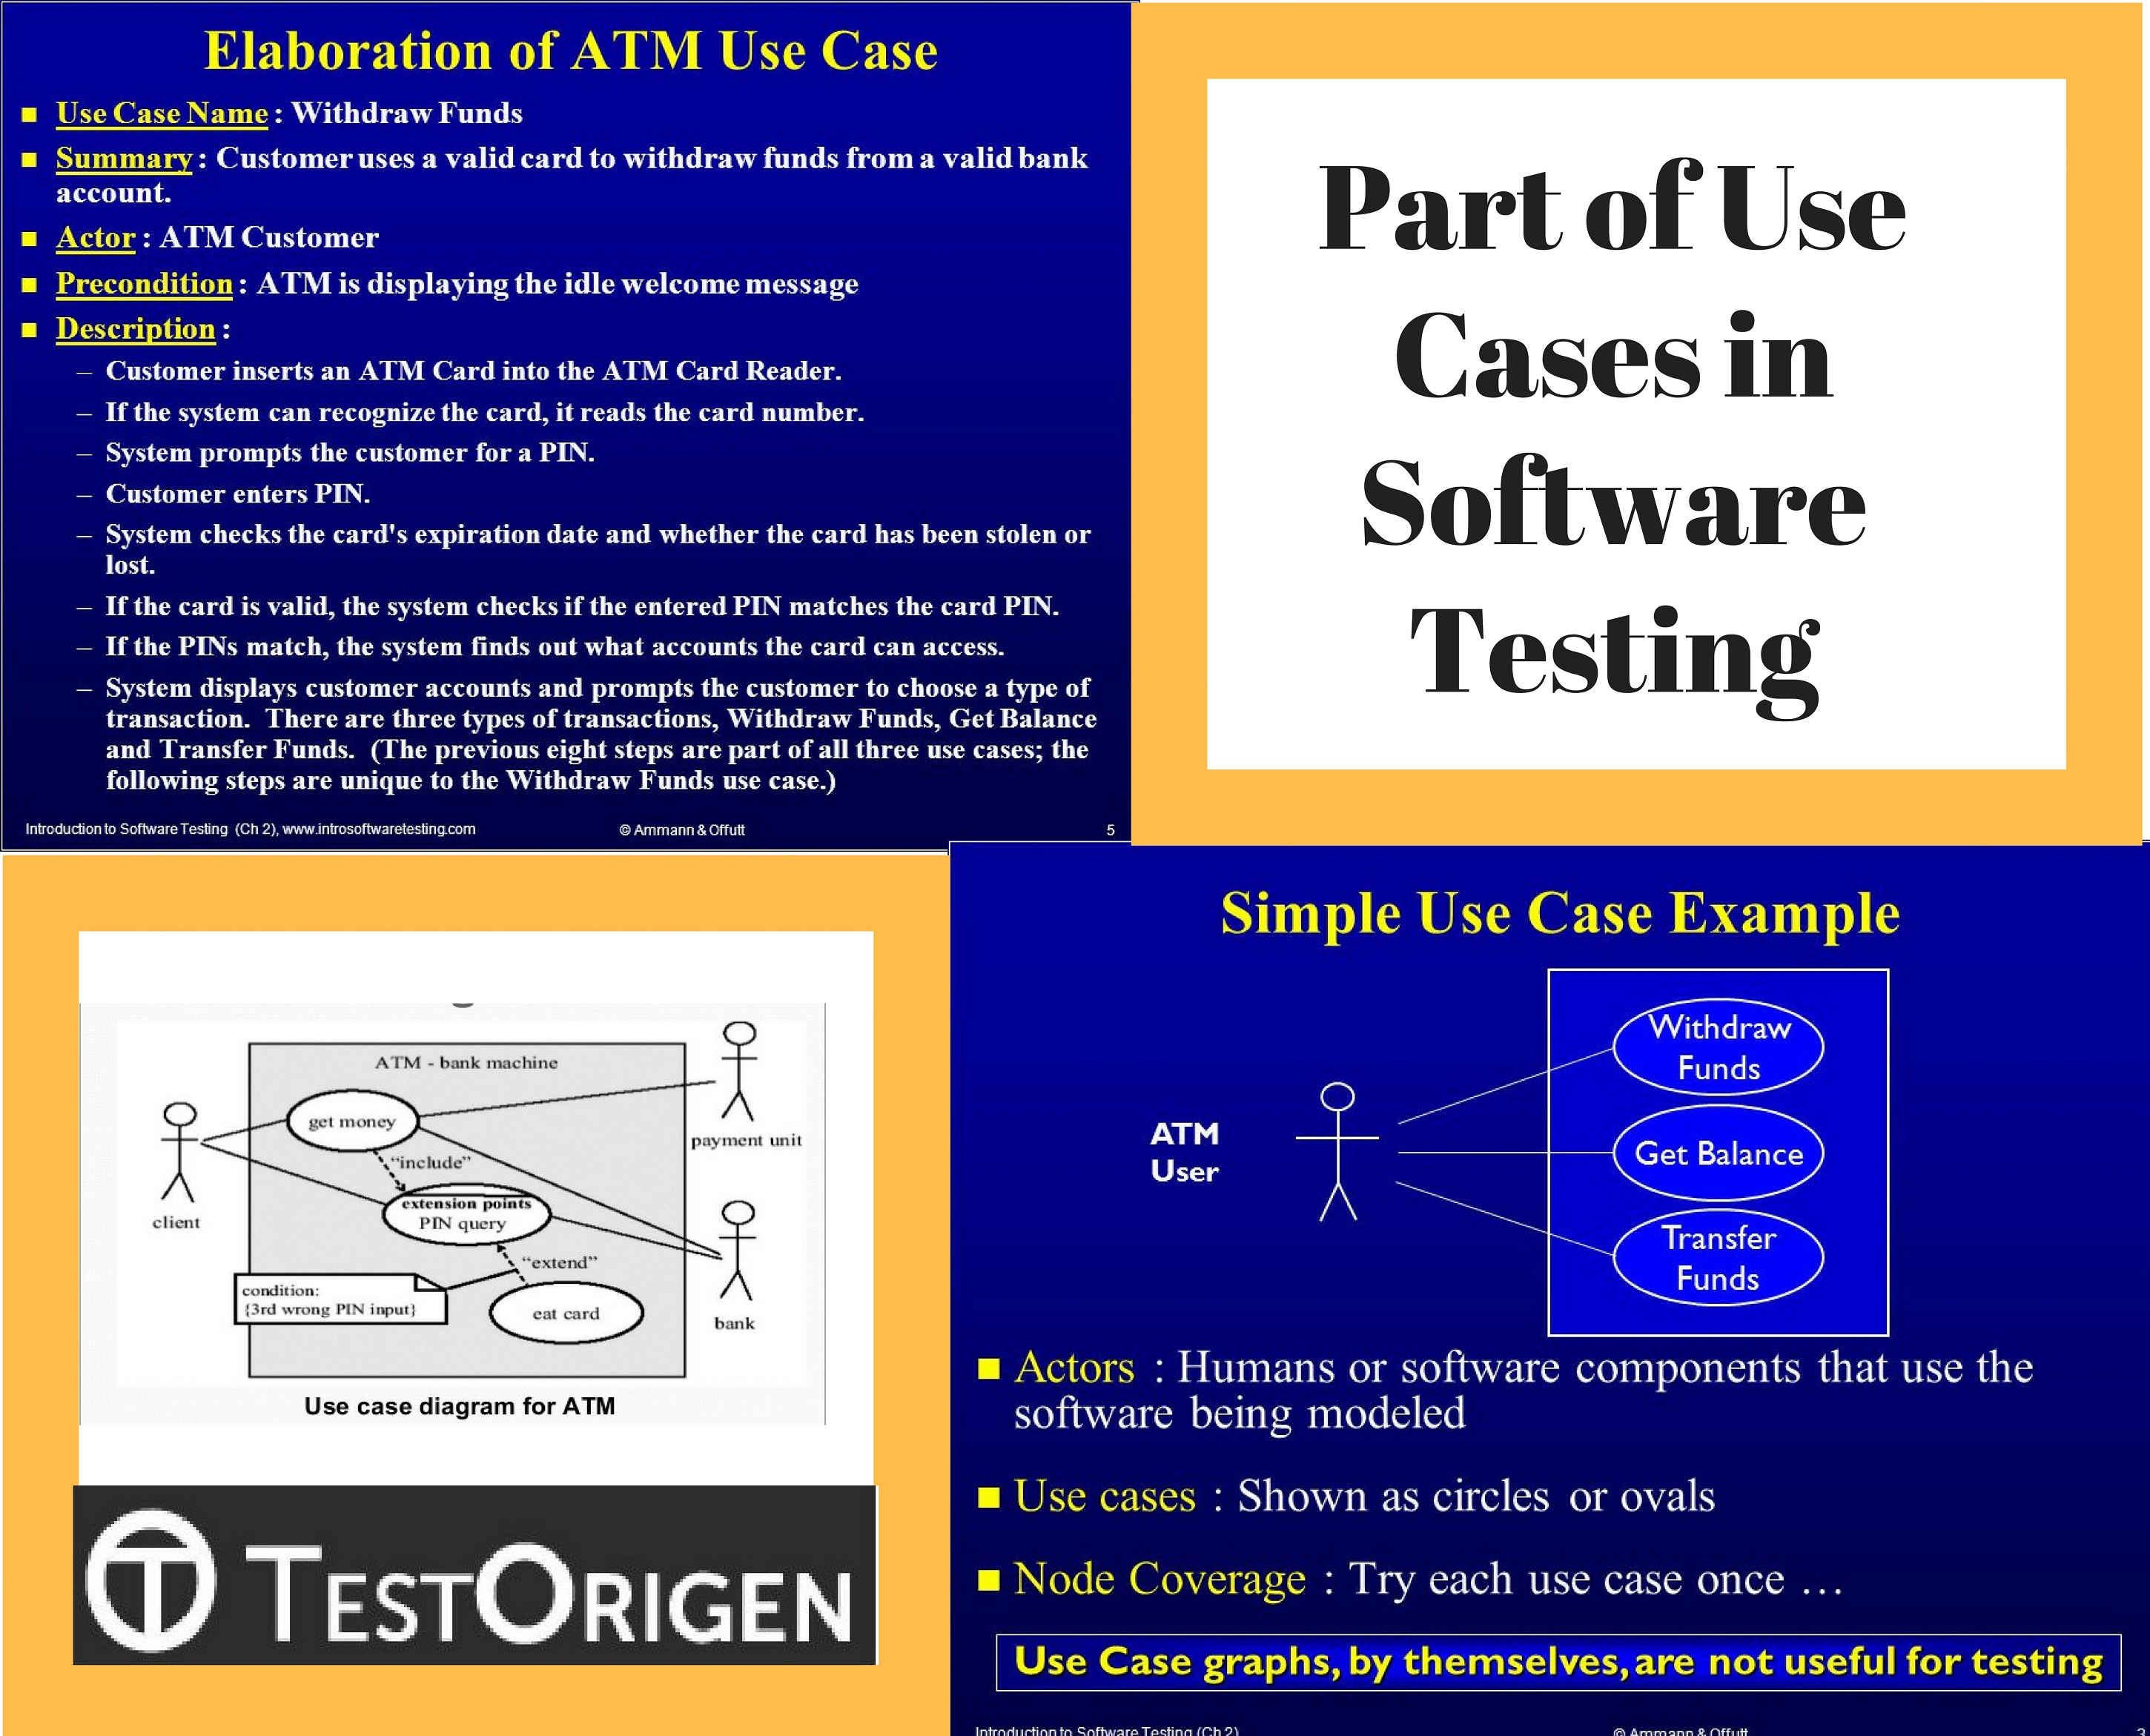 Part of Use Cases in Software Testing